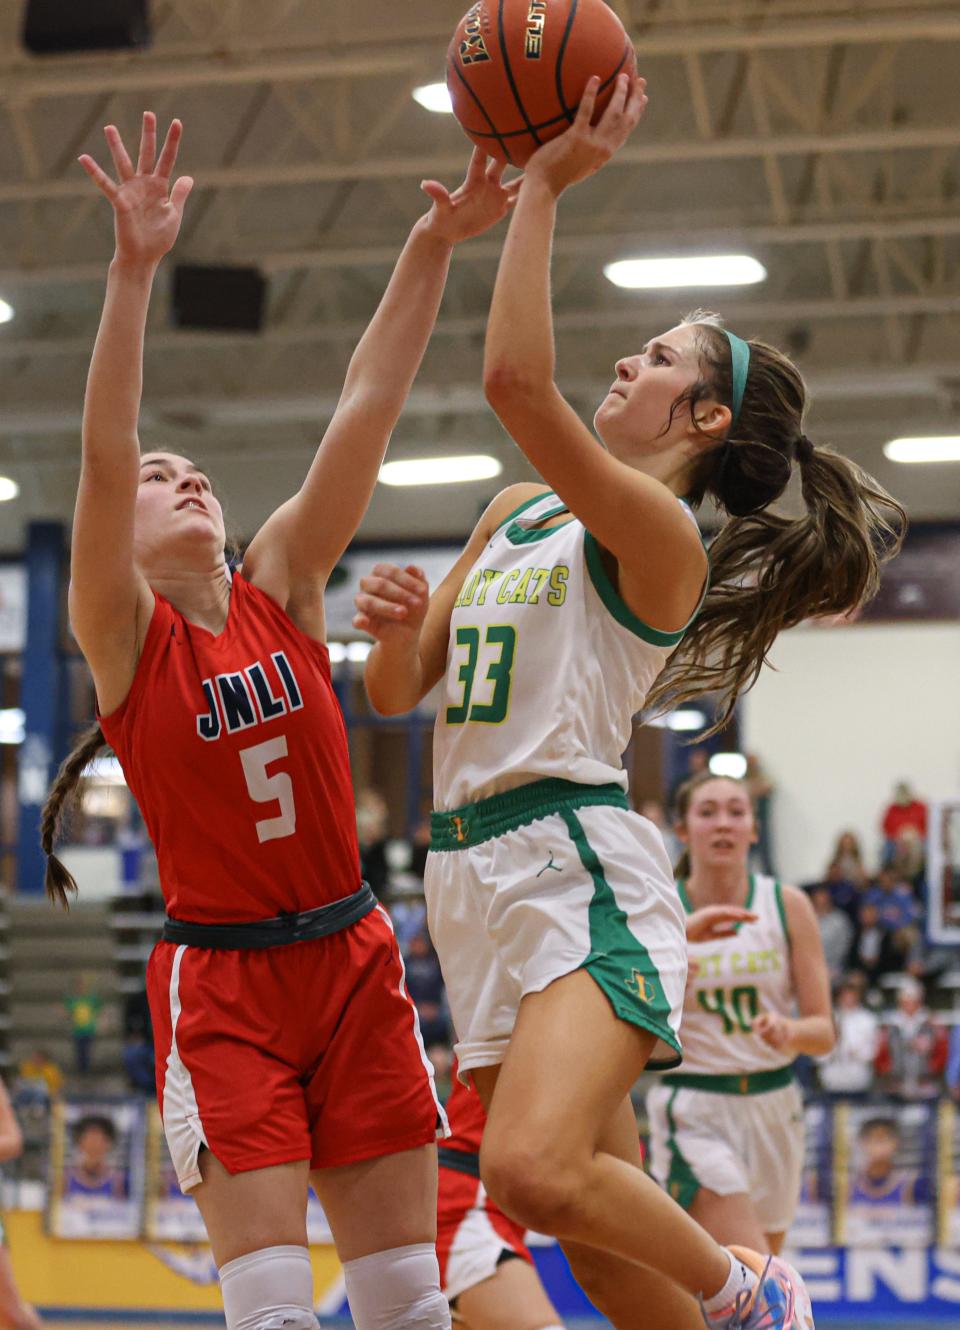 Idalou's Logan Heard (33) shoots a layup against Jim Ned in the Region I-3A semifinal girls basketball quarterfinal game, Friday, Feb. 24, 2023, at Tiger Pit in Wolfforth.